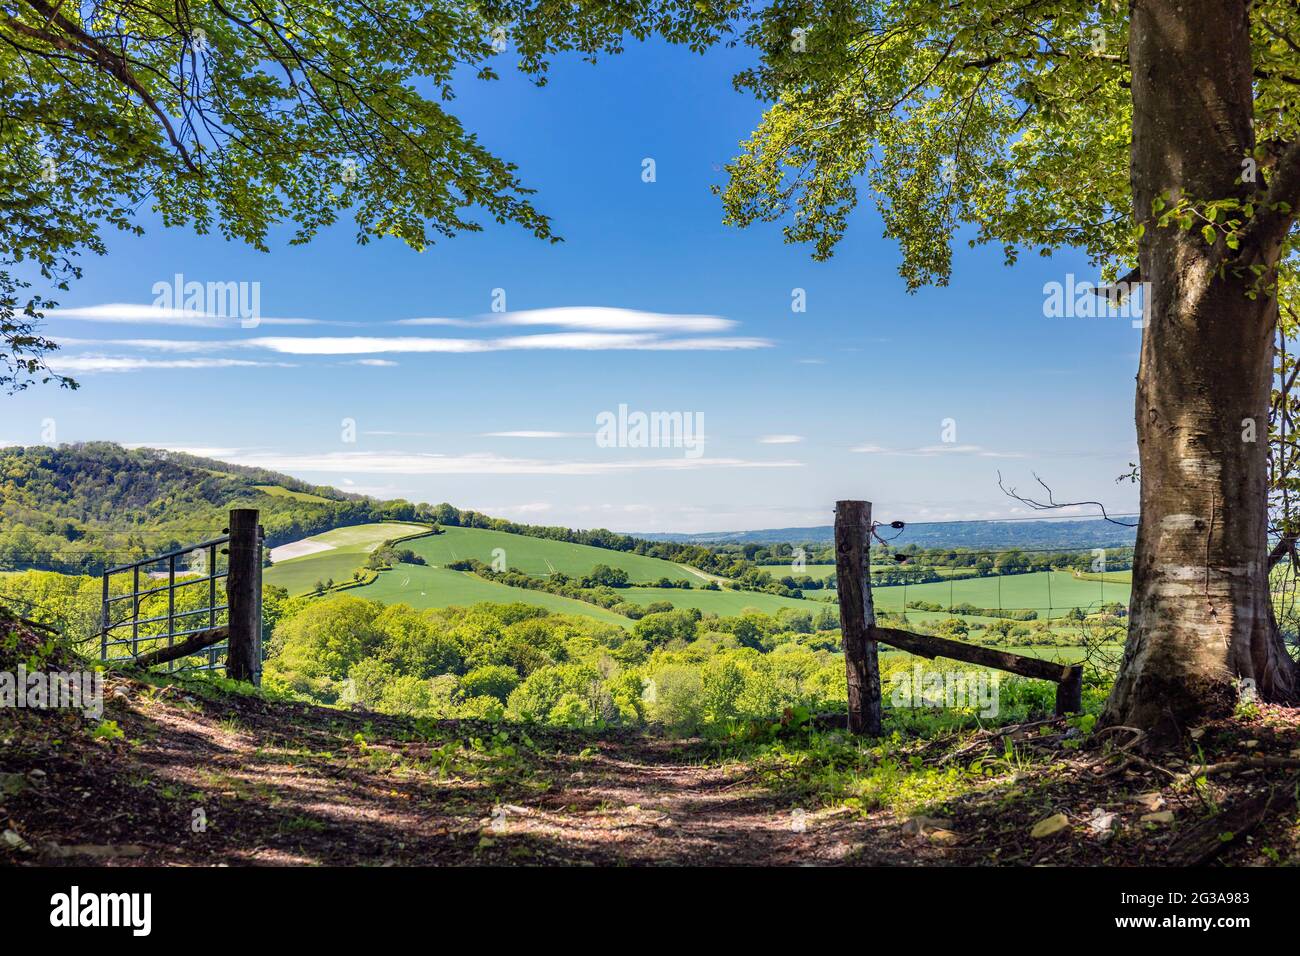 Vista sul South Downs National Park, Cocking, West Sussex, Inghilterra. Foto Stock